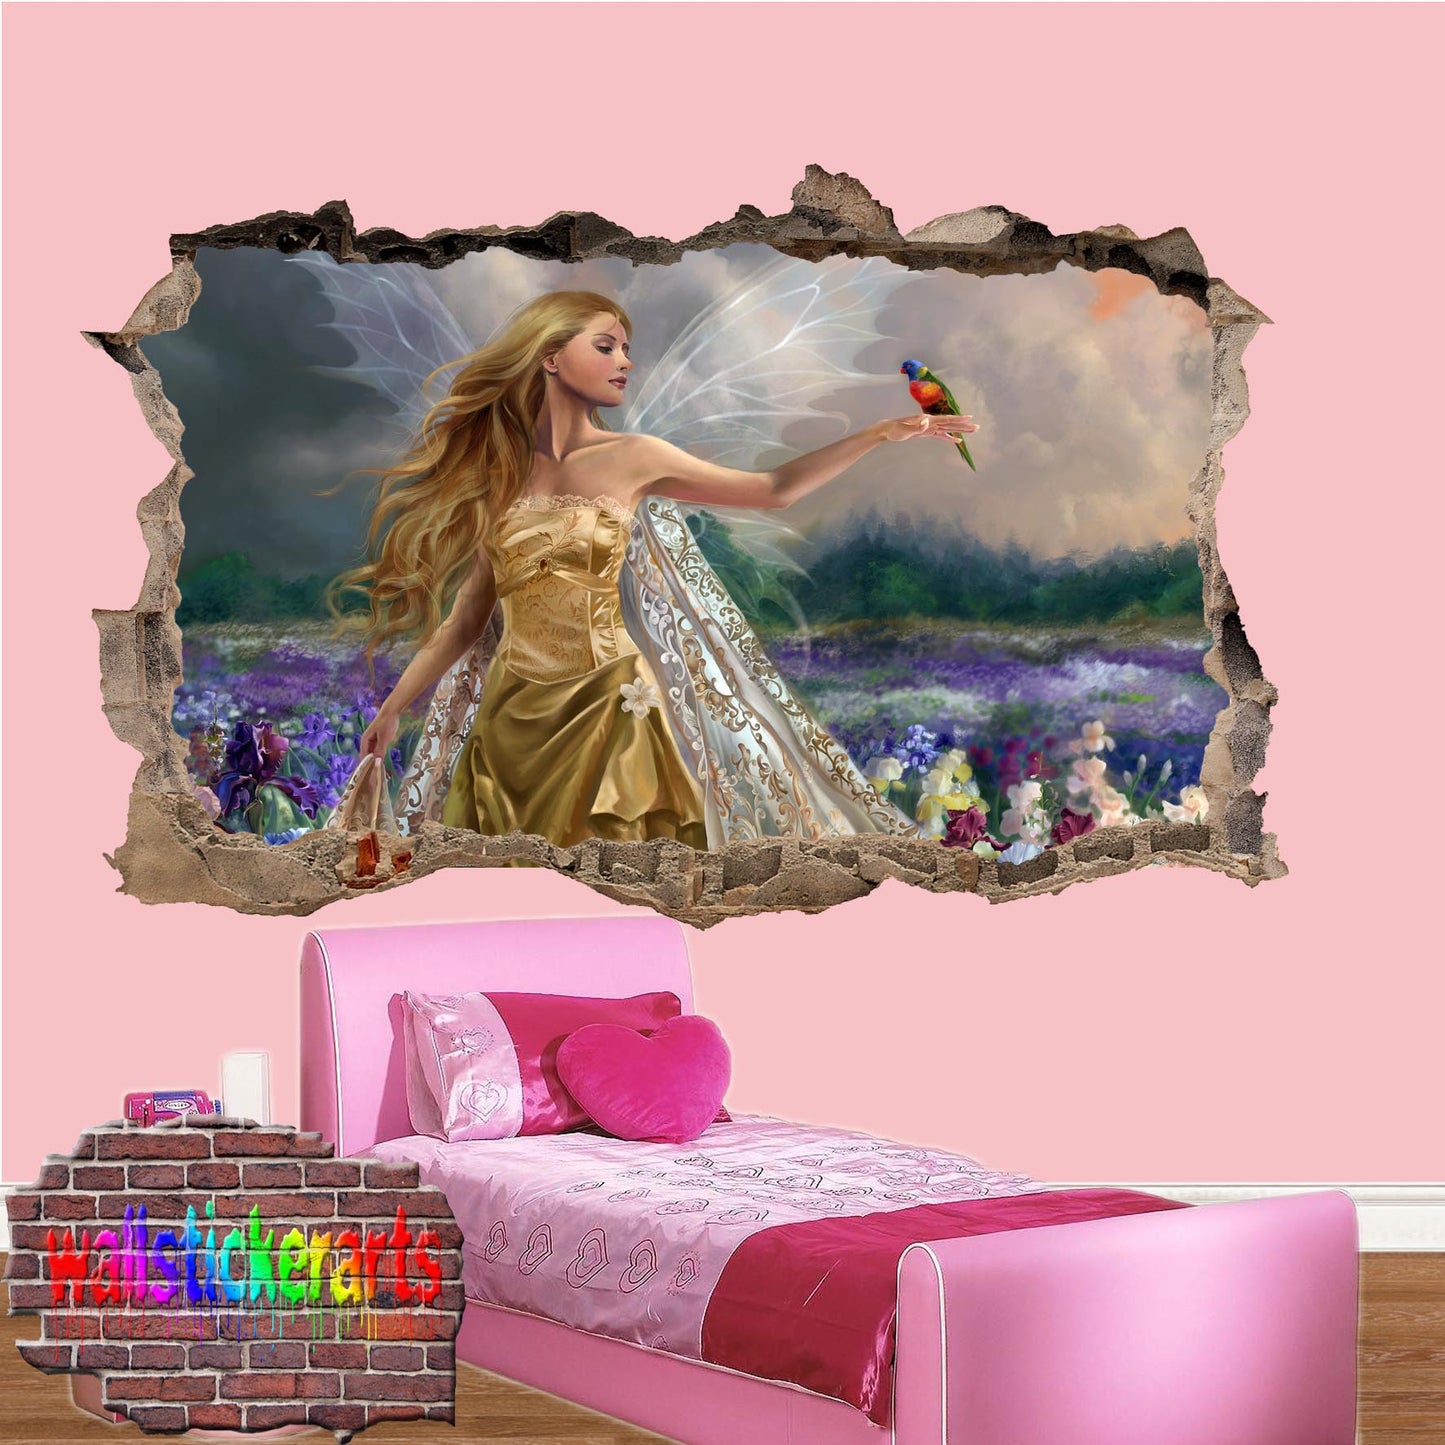 Angel Flower Field Parrot 3d Smashed Wall Sticker Room Decoration Decal Mural